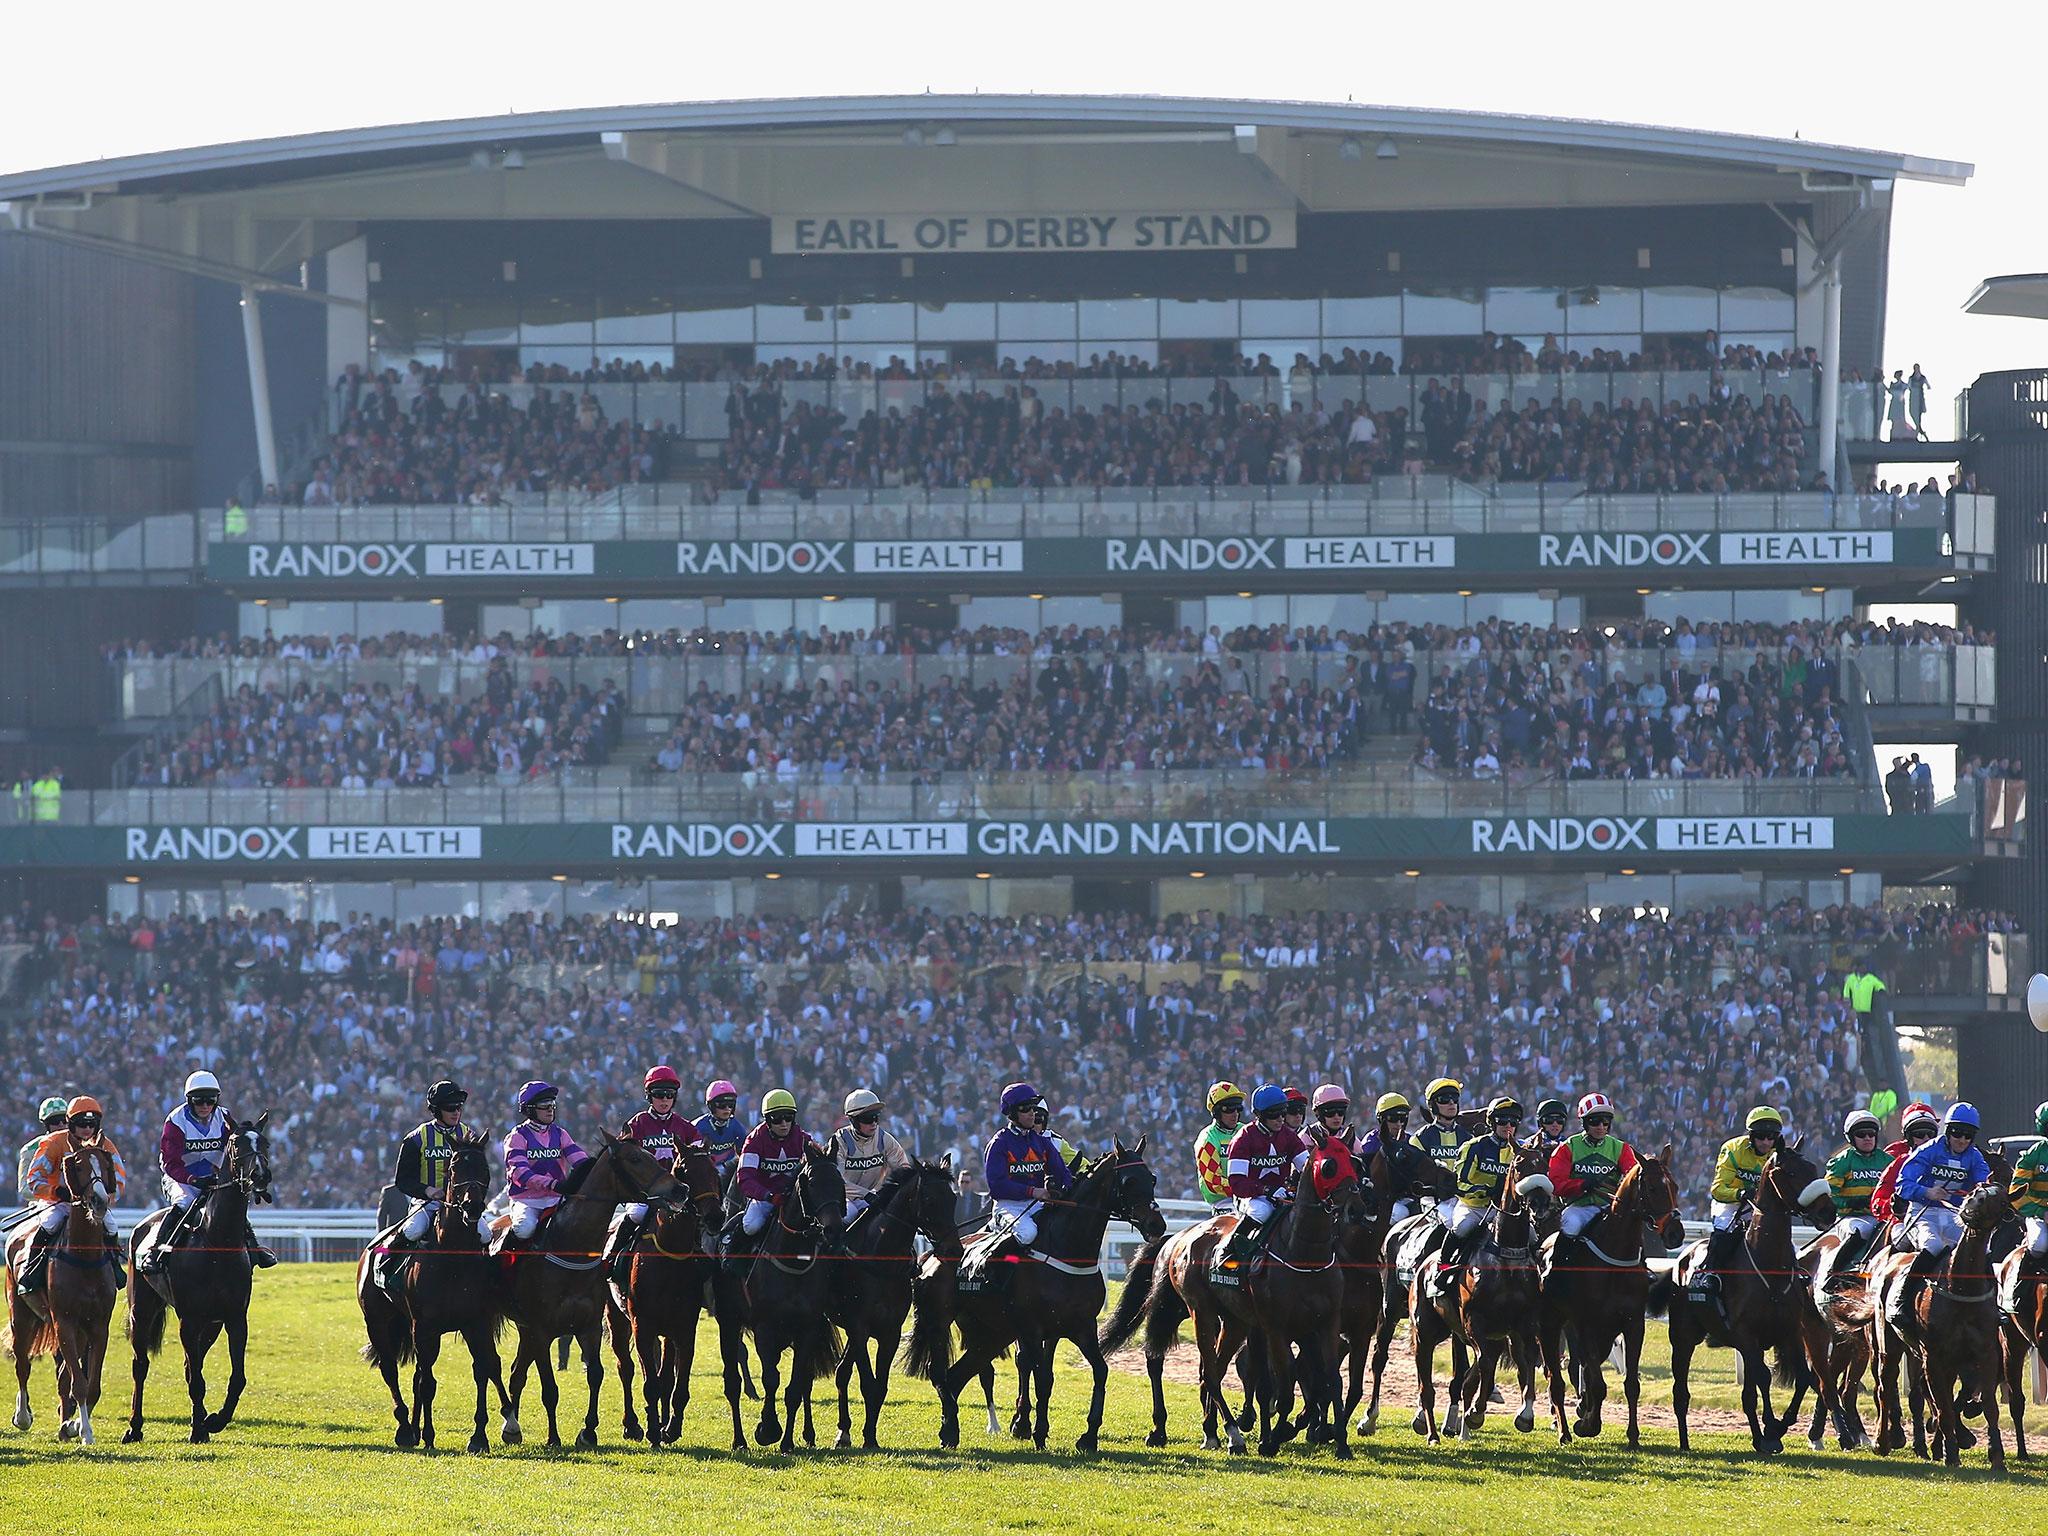 The horses will take post at 5.15pm on Saturday 14 April